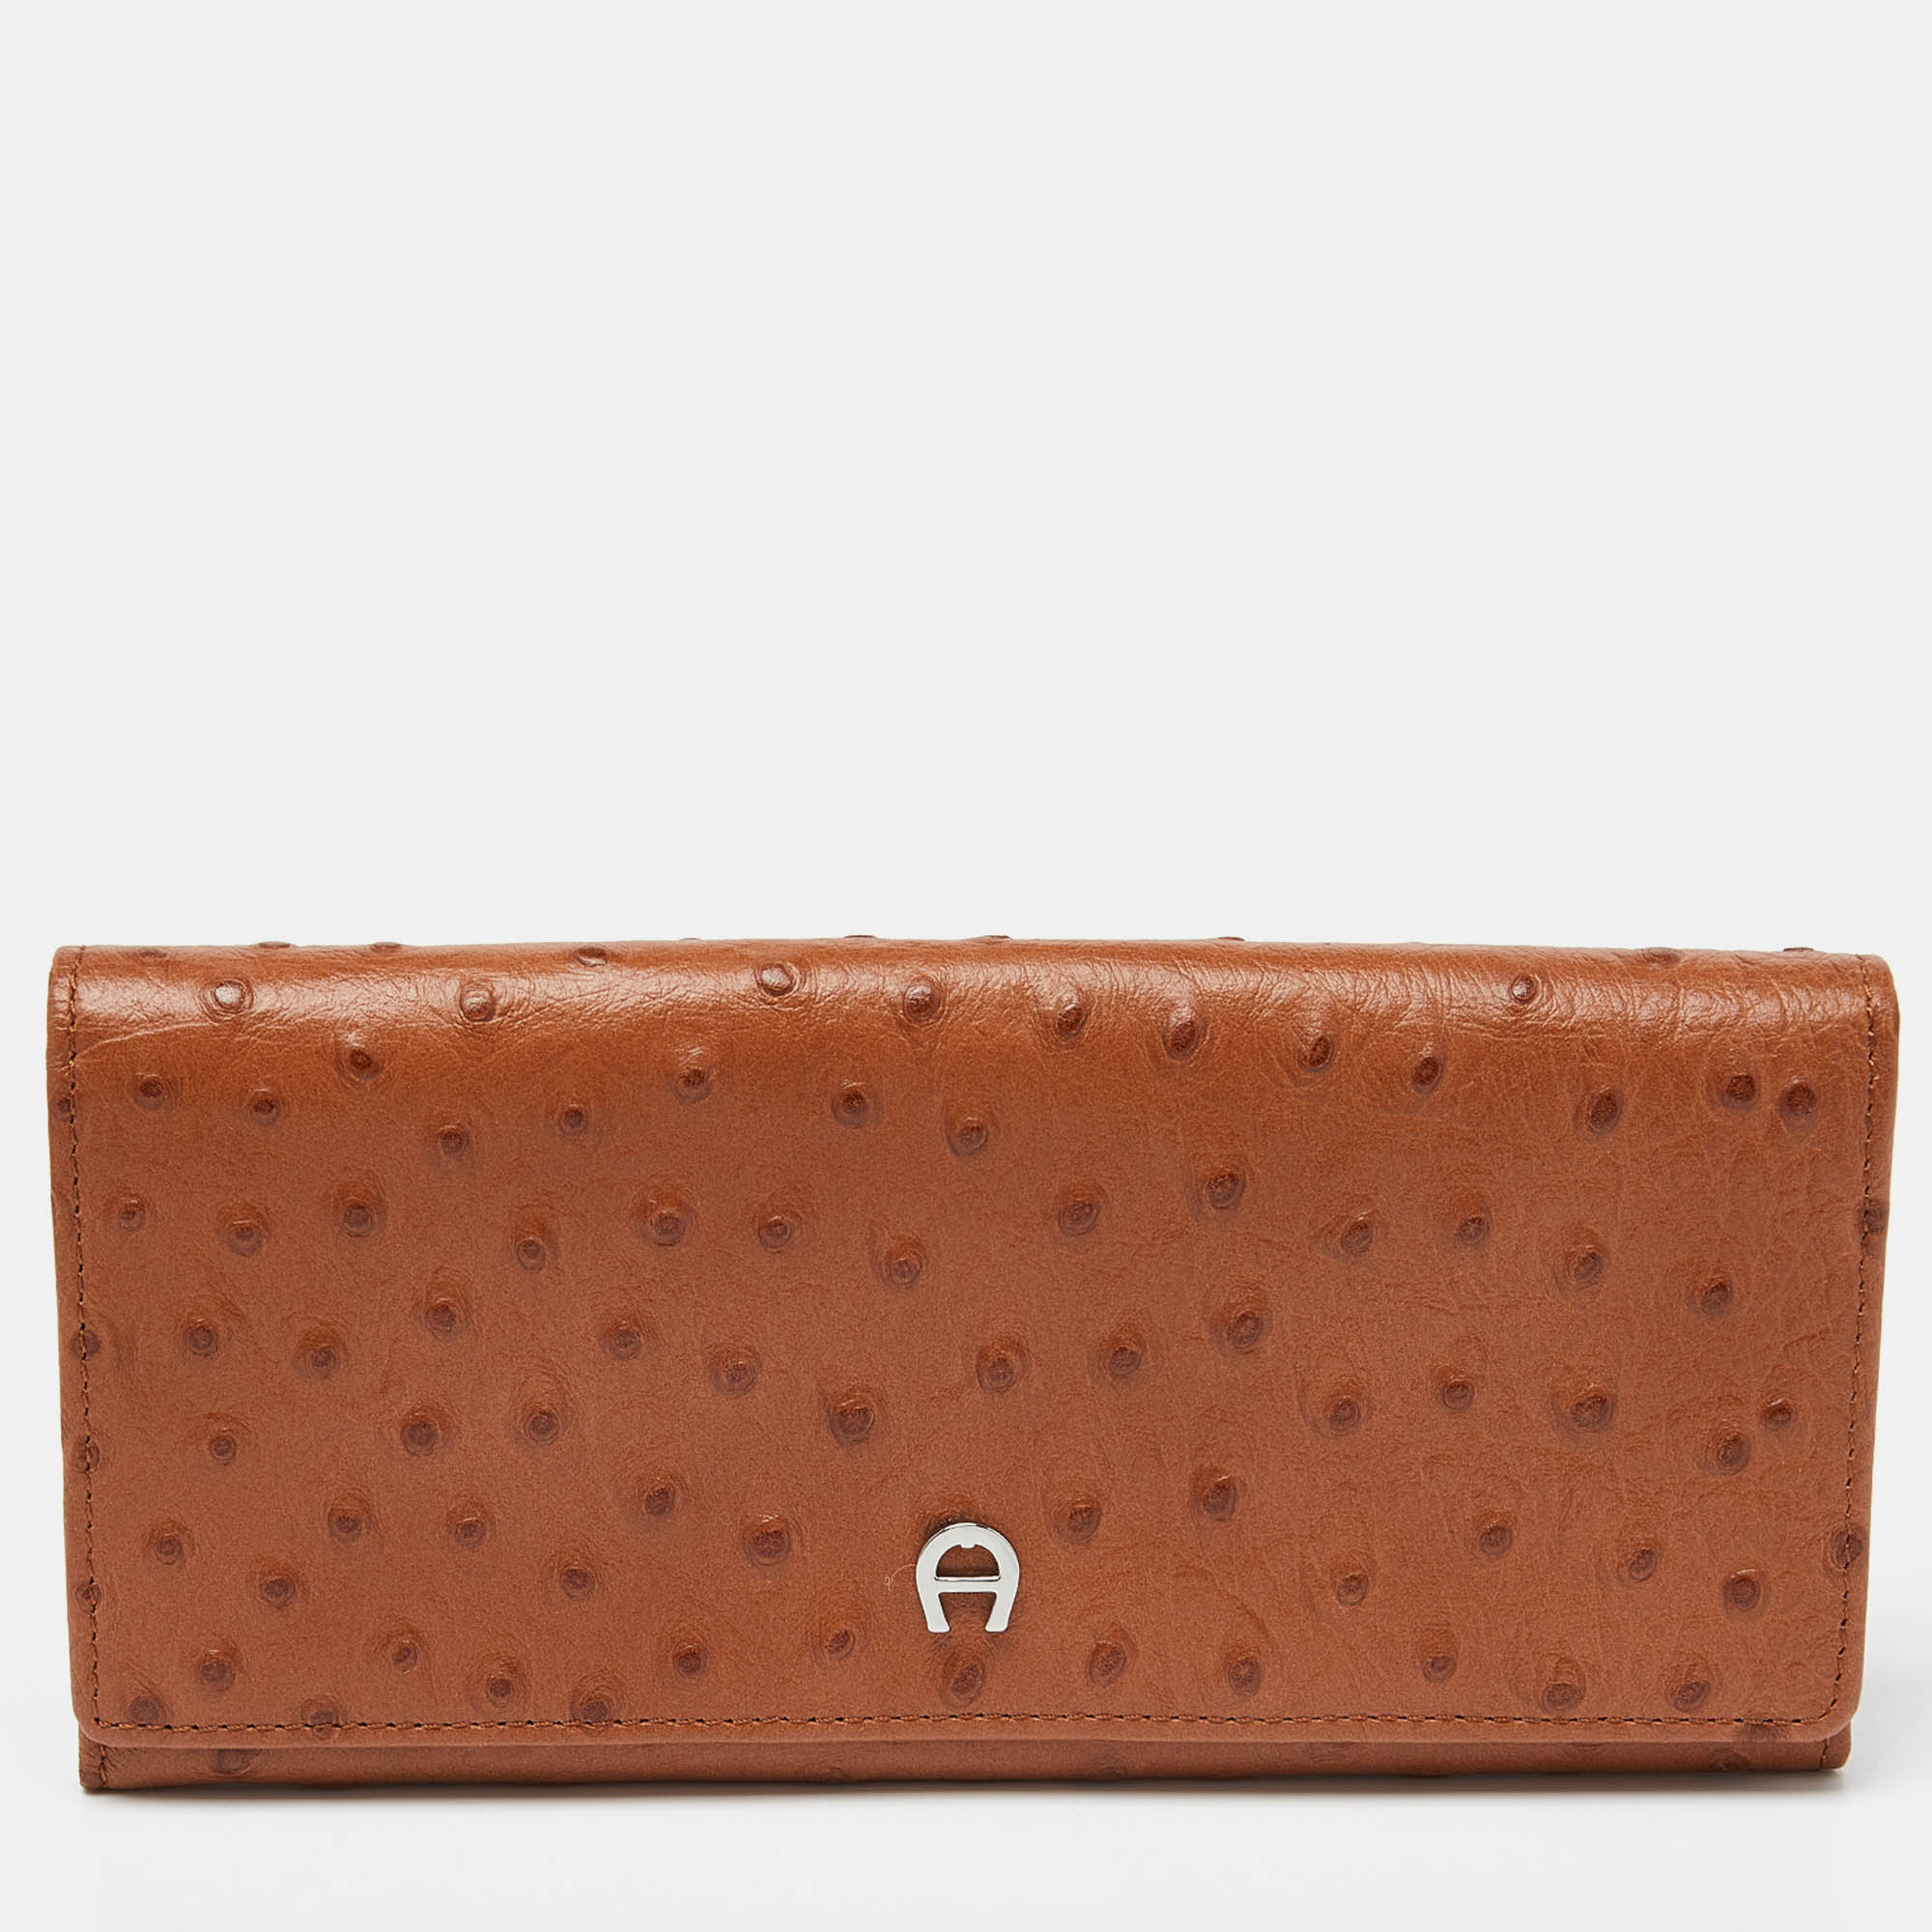 Pre-owned Aigner Tan Ostrich Embossed Leather Flap Continental Wallet